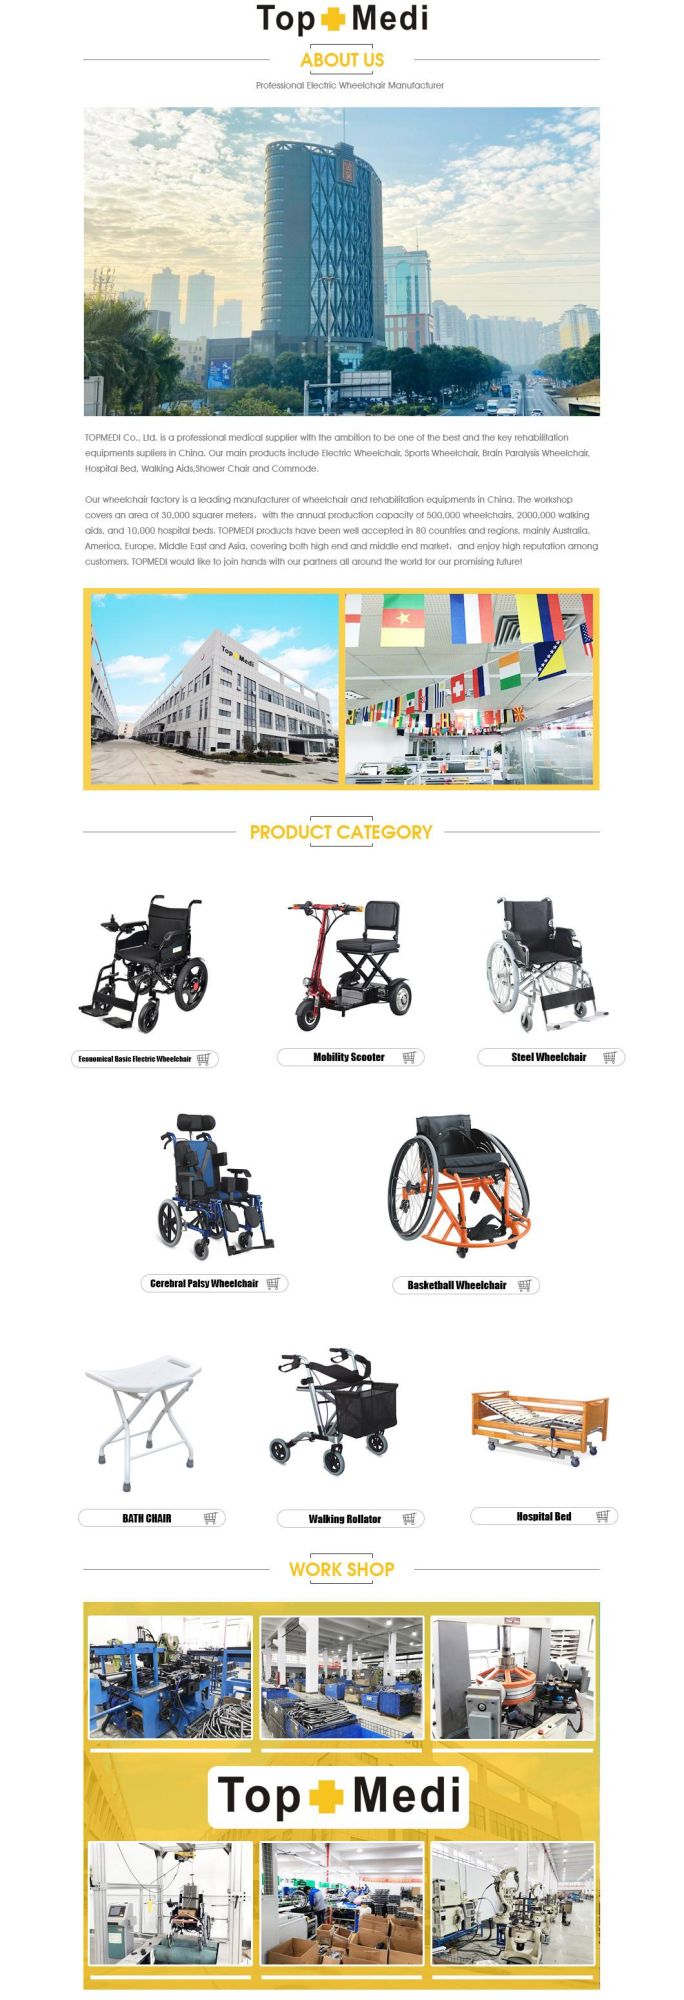 Factory Motorised Lightweight Folding Adult Electric Wheelchairs for Sale